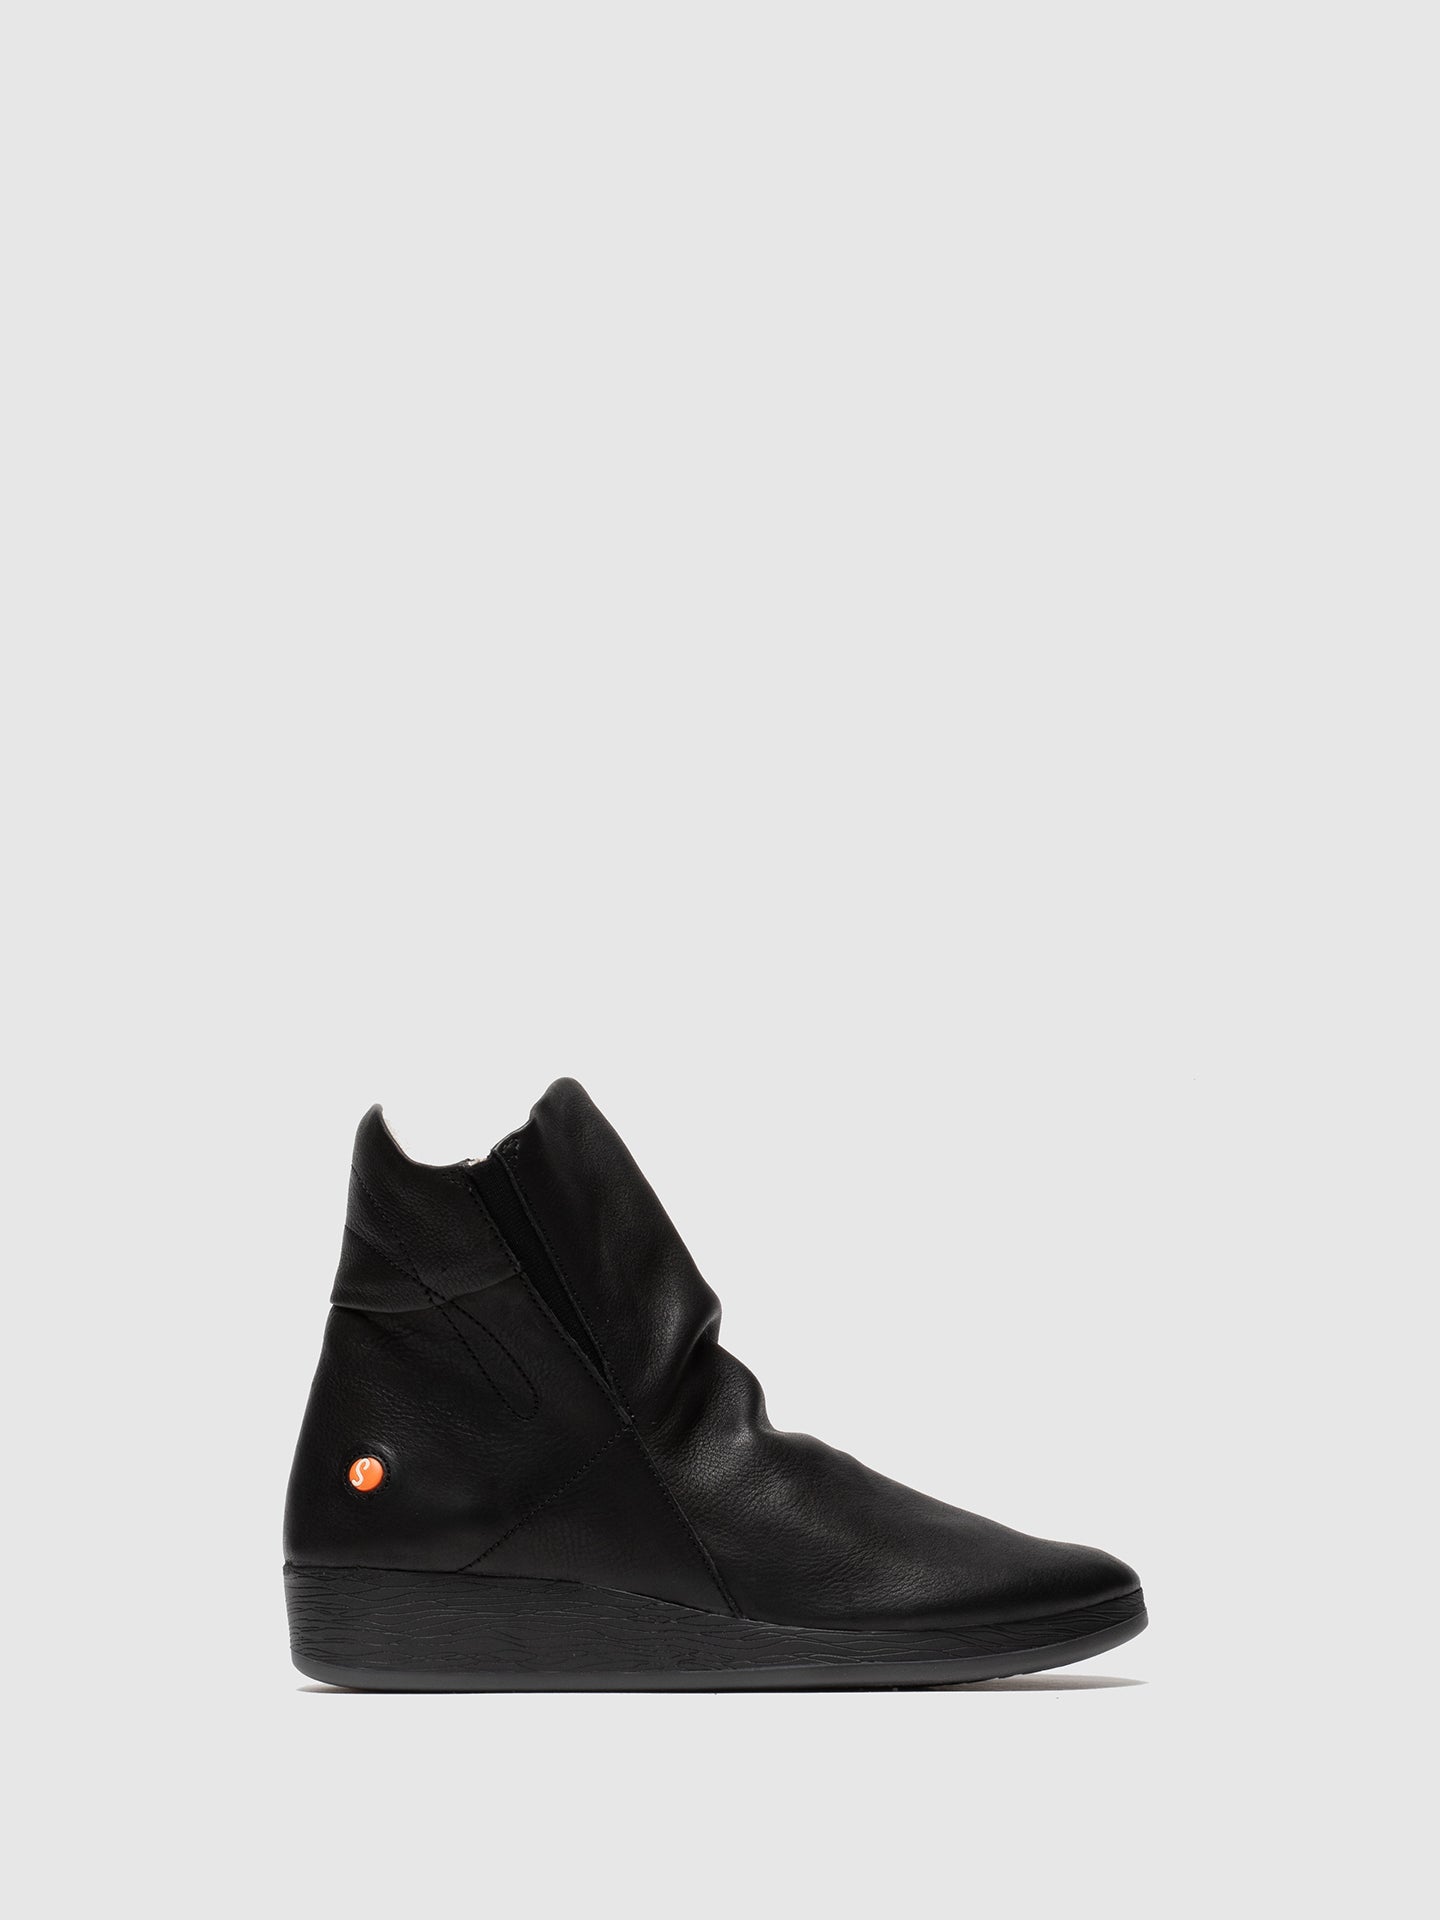 Softinos Black Zip Up Ankle Boots